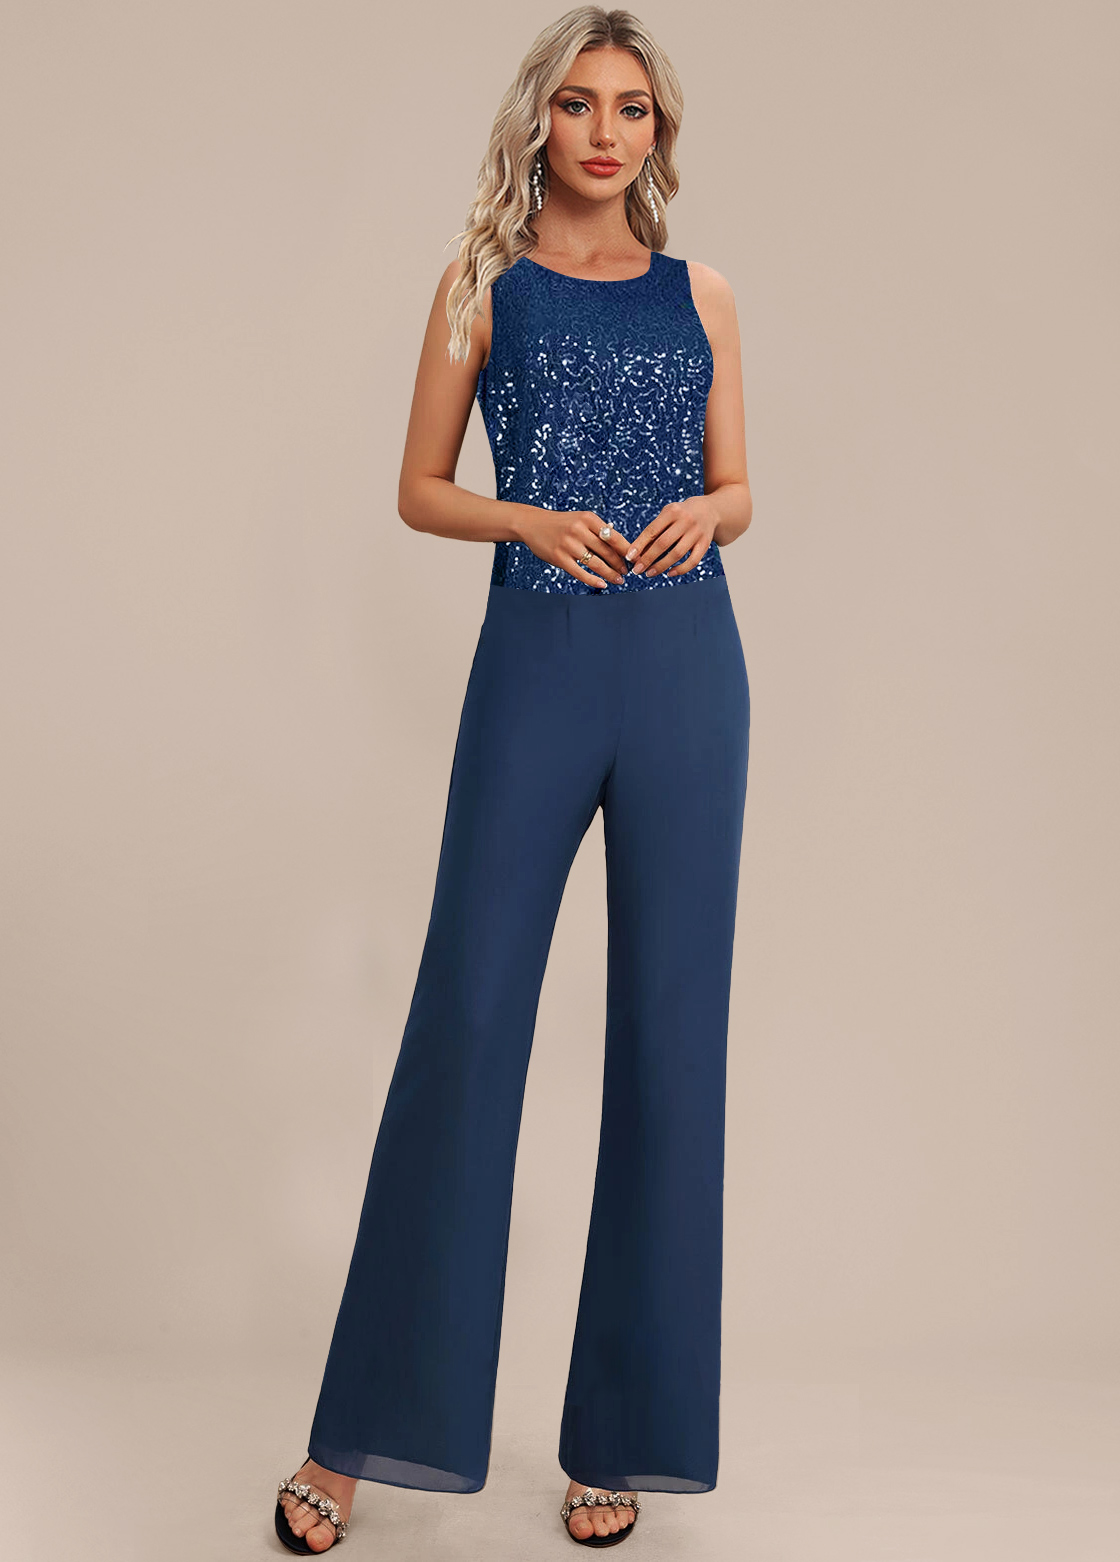 Patchwork Long Round Neck Sleeveless Navy Jumpsuit and Cardigan